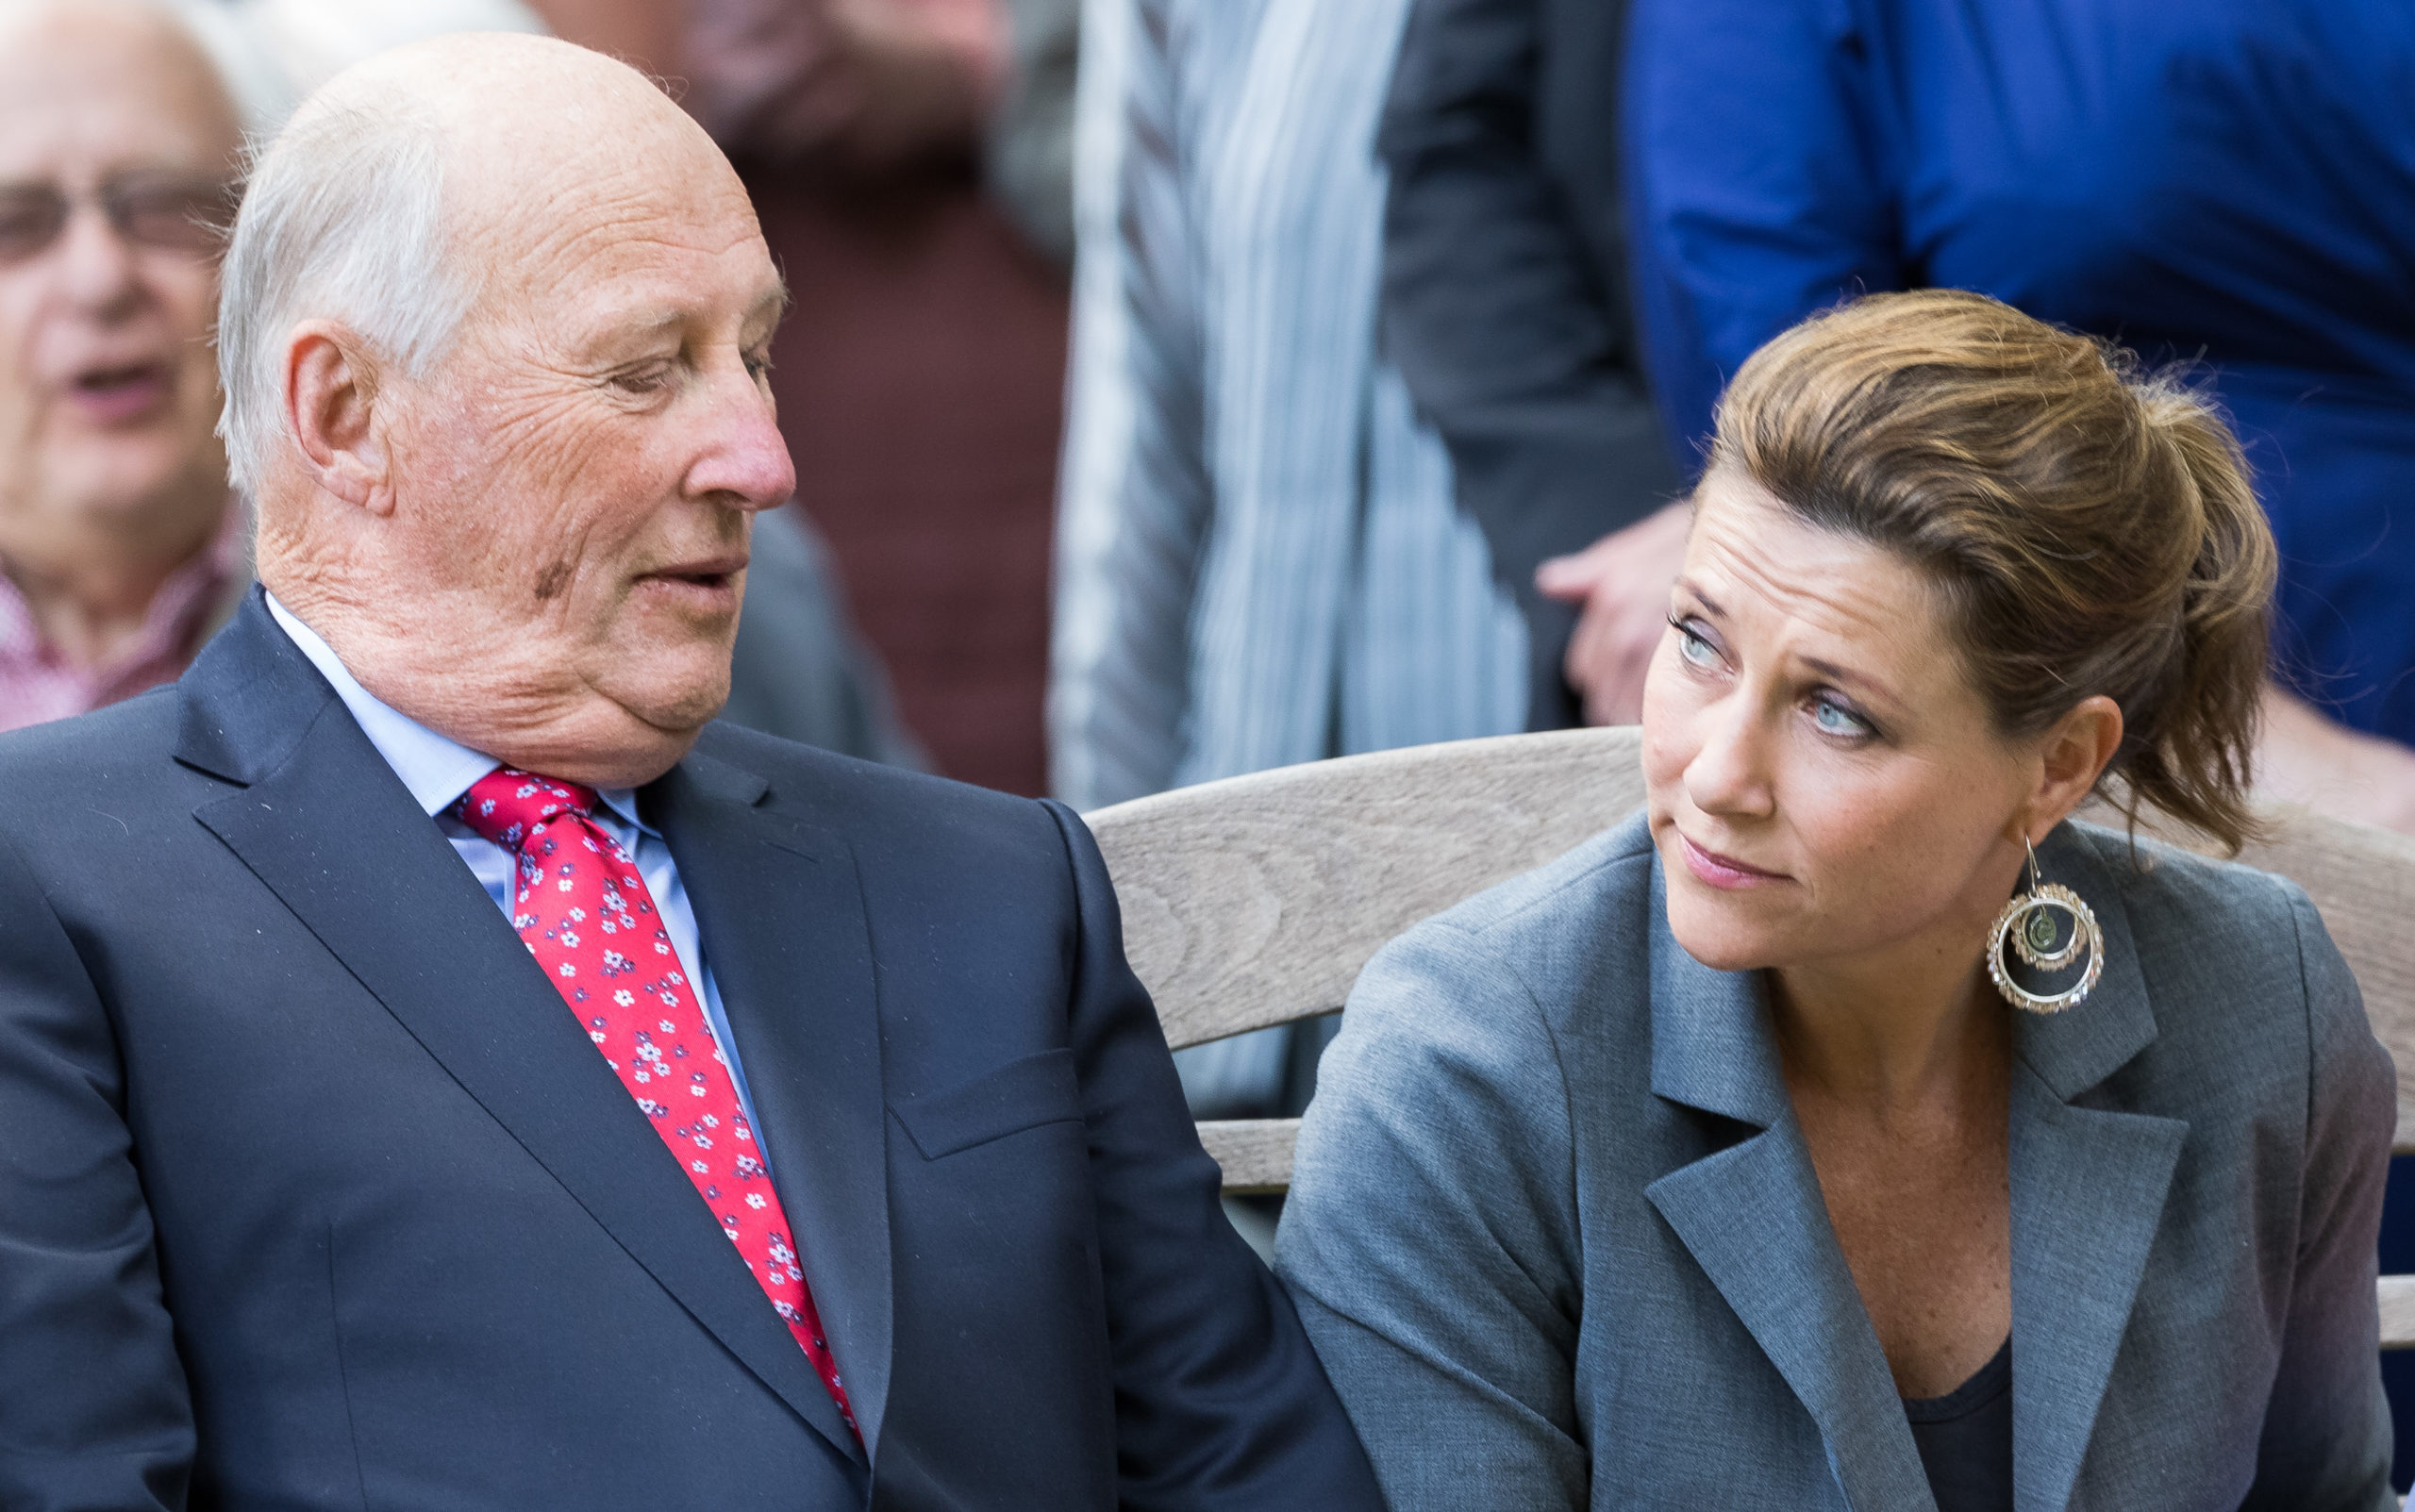 King Harald of Norway speaks for the first time about the latest controversy surrounding his future son-in-law, the shaman Durek Verret.